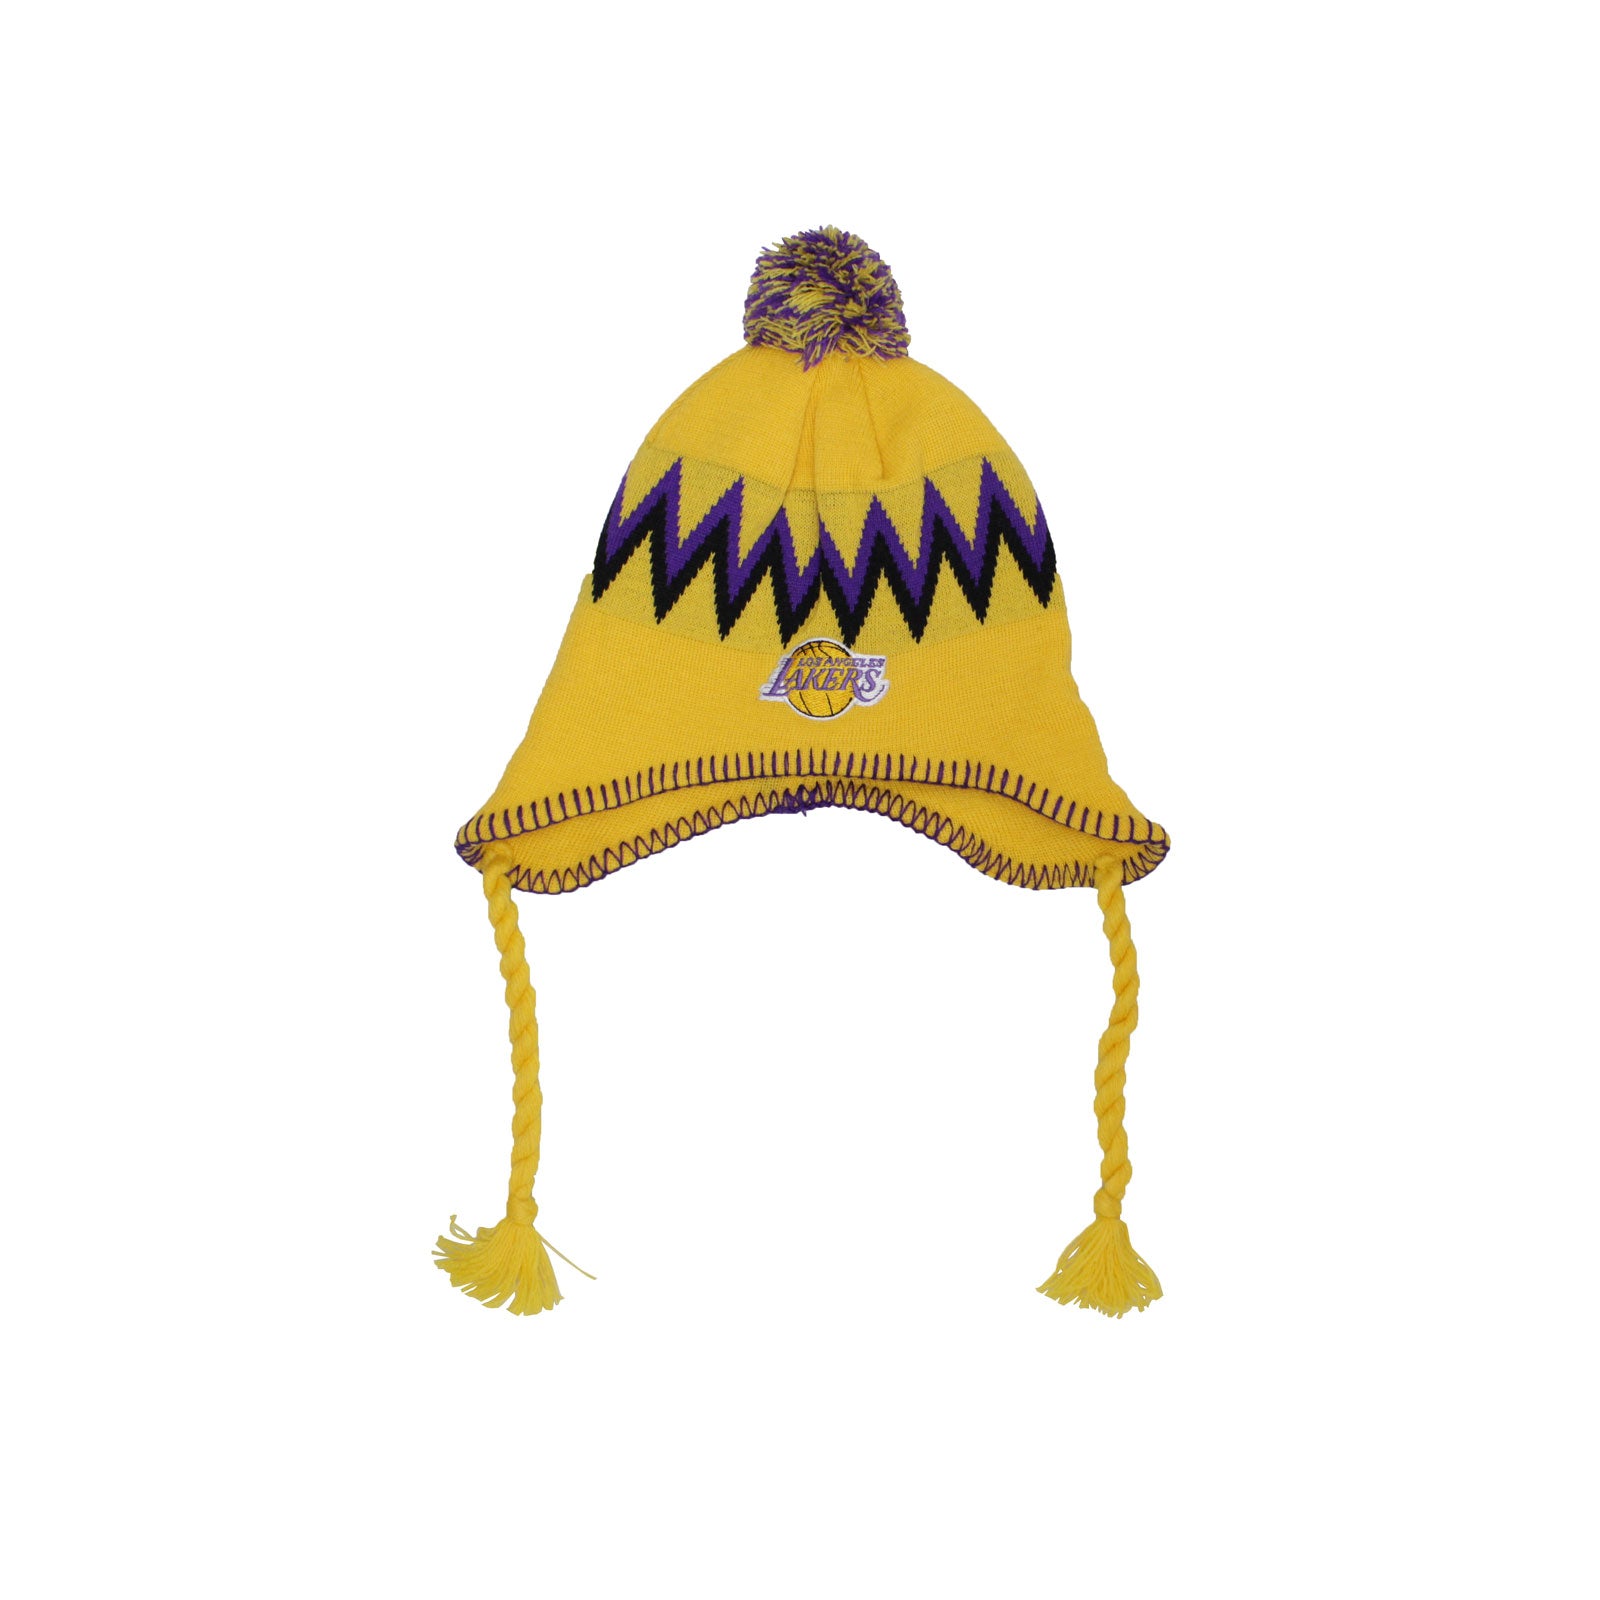 Los Angeles Lakers Peruvian Knit Hat LKR6037 (Gold)